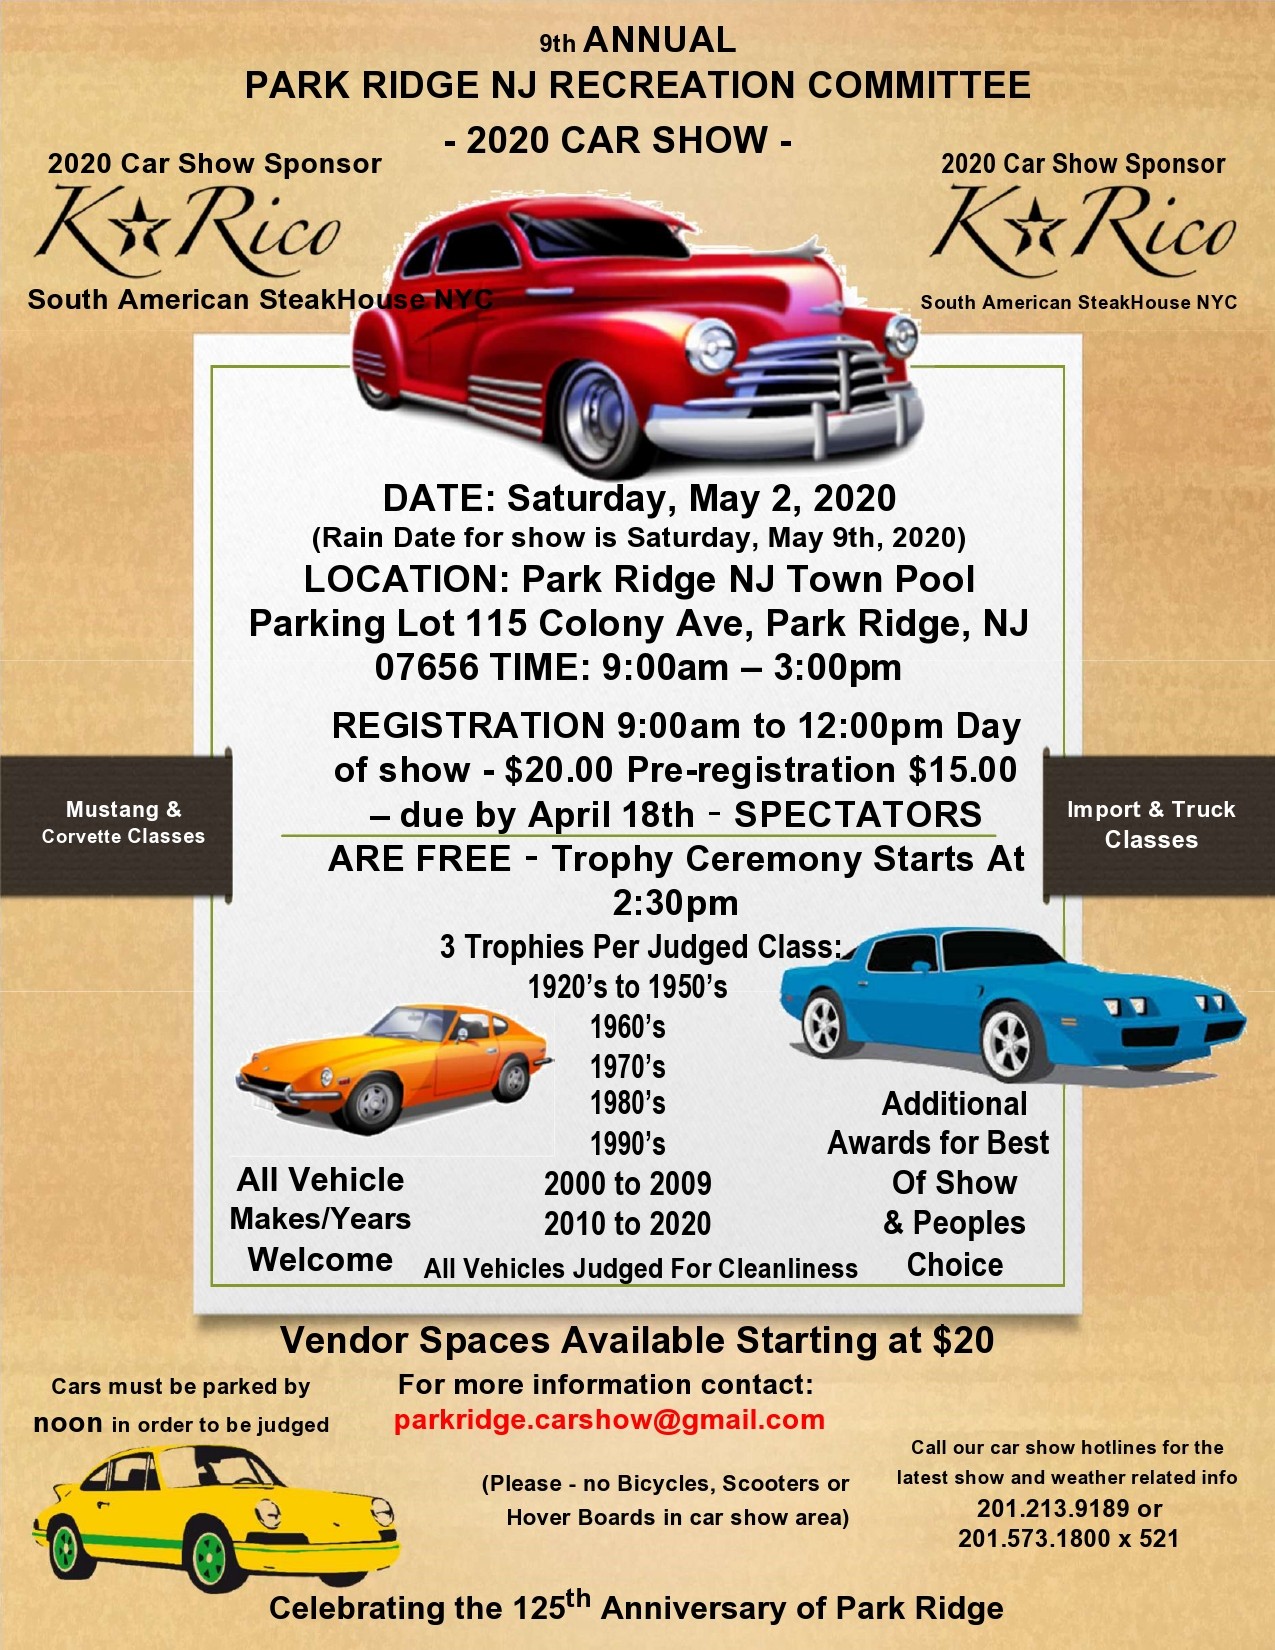 car show flyer template word, free car show flyer template word, blank car show flyer template, free car show flyer templates, car show flyer editable